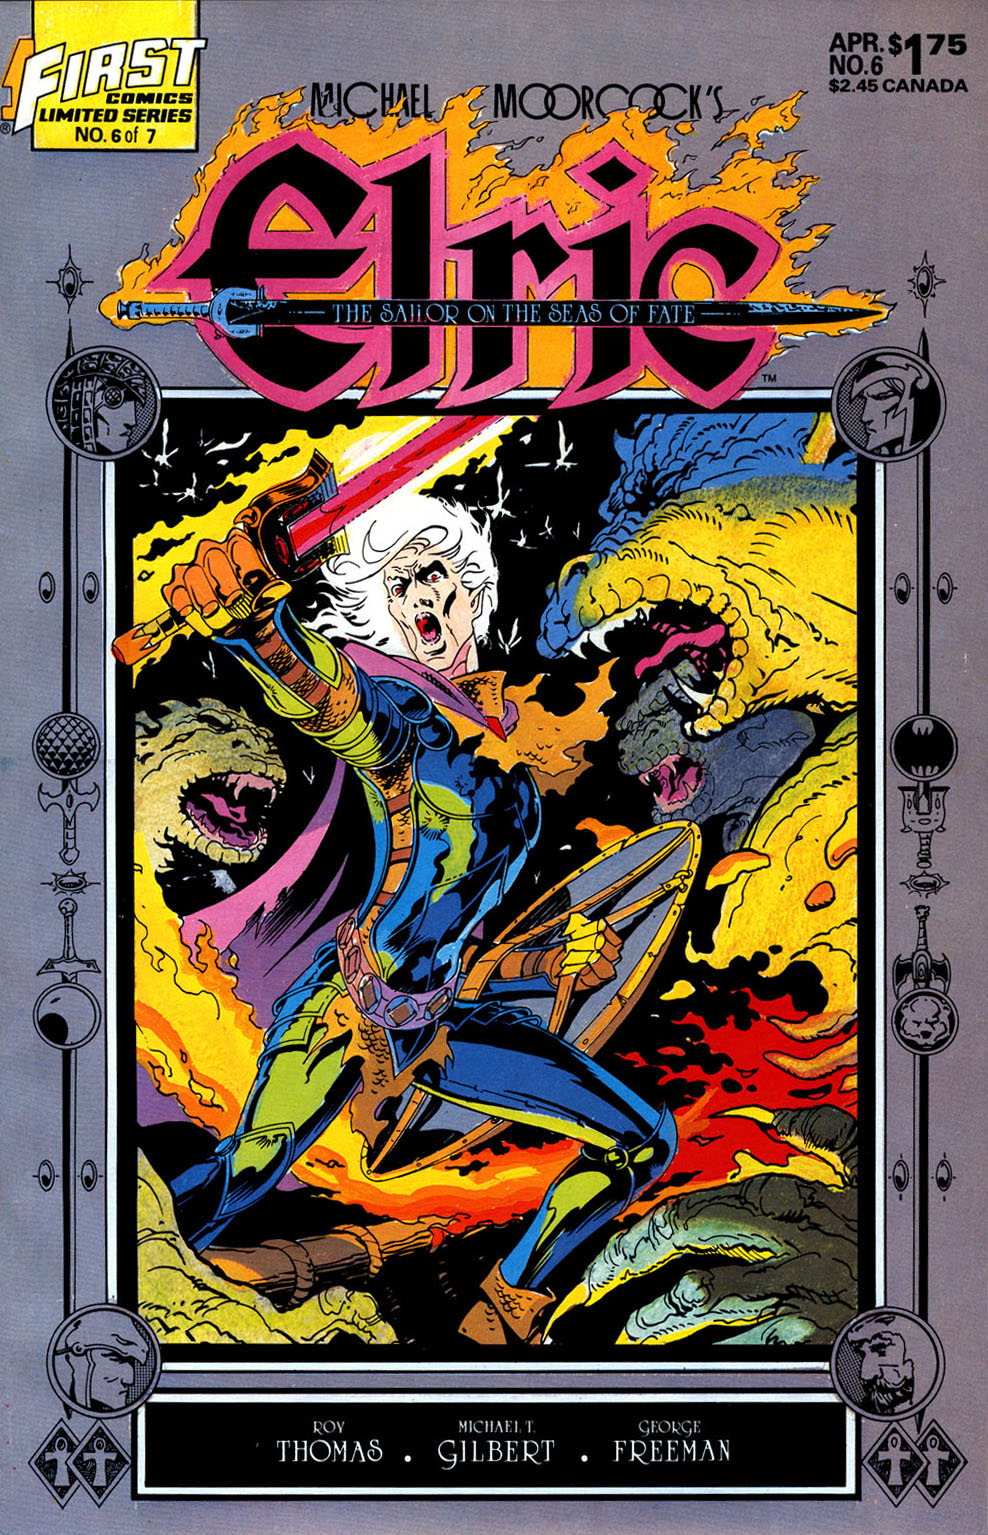 Read online Elric: Sailor on the Seas of Fate comic -  Issue #6 - 1